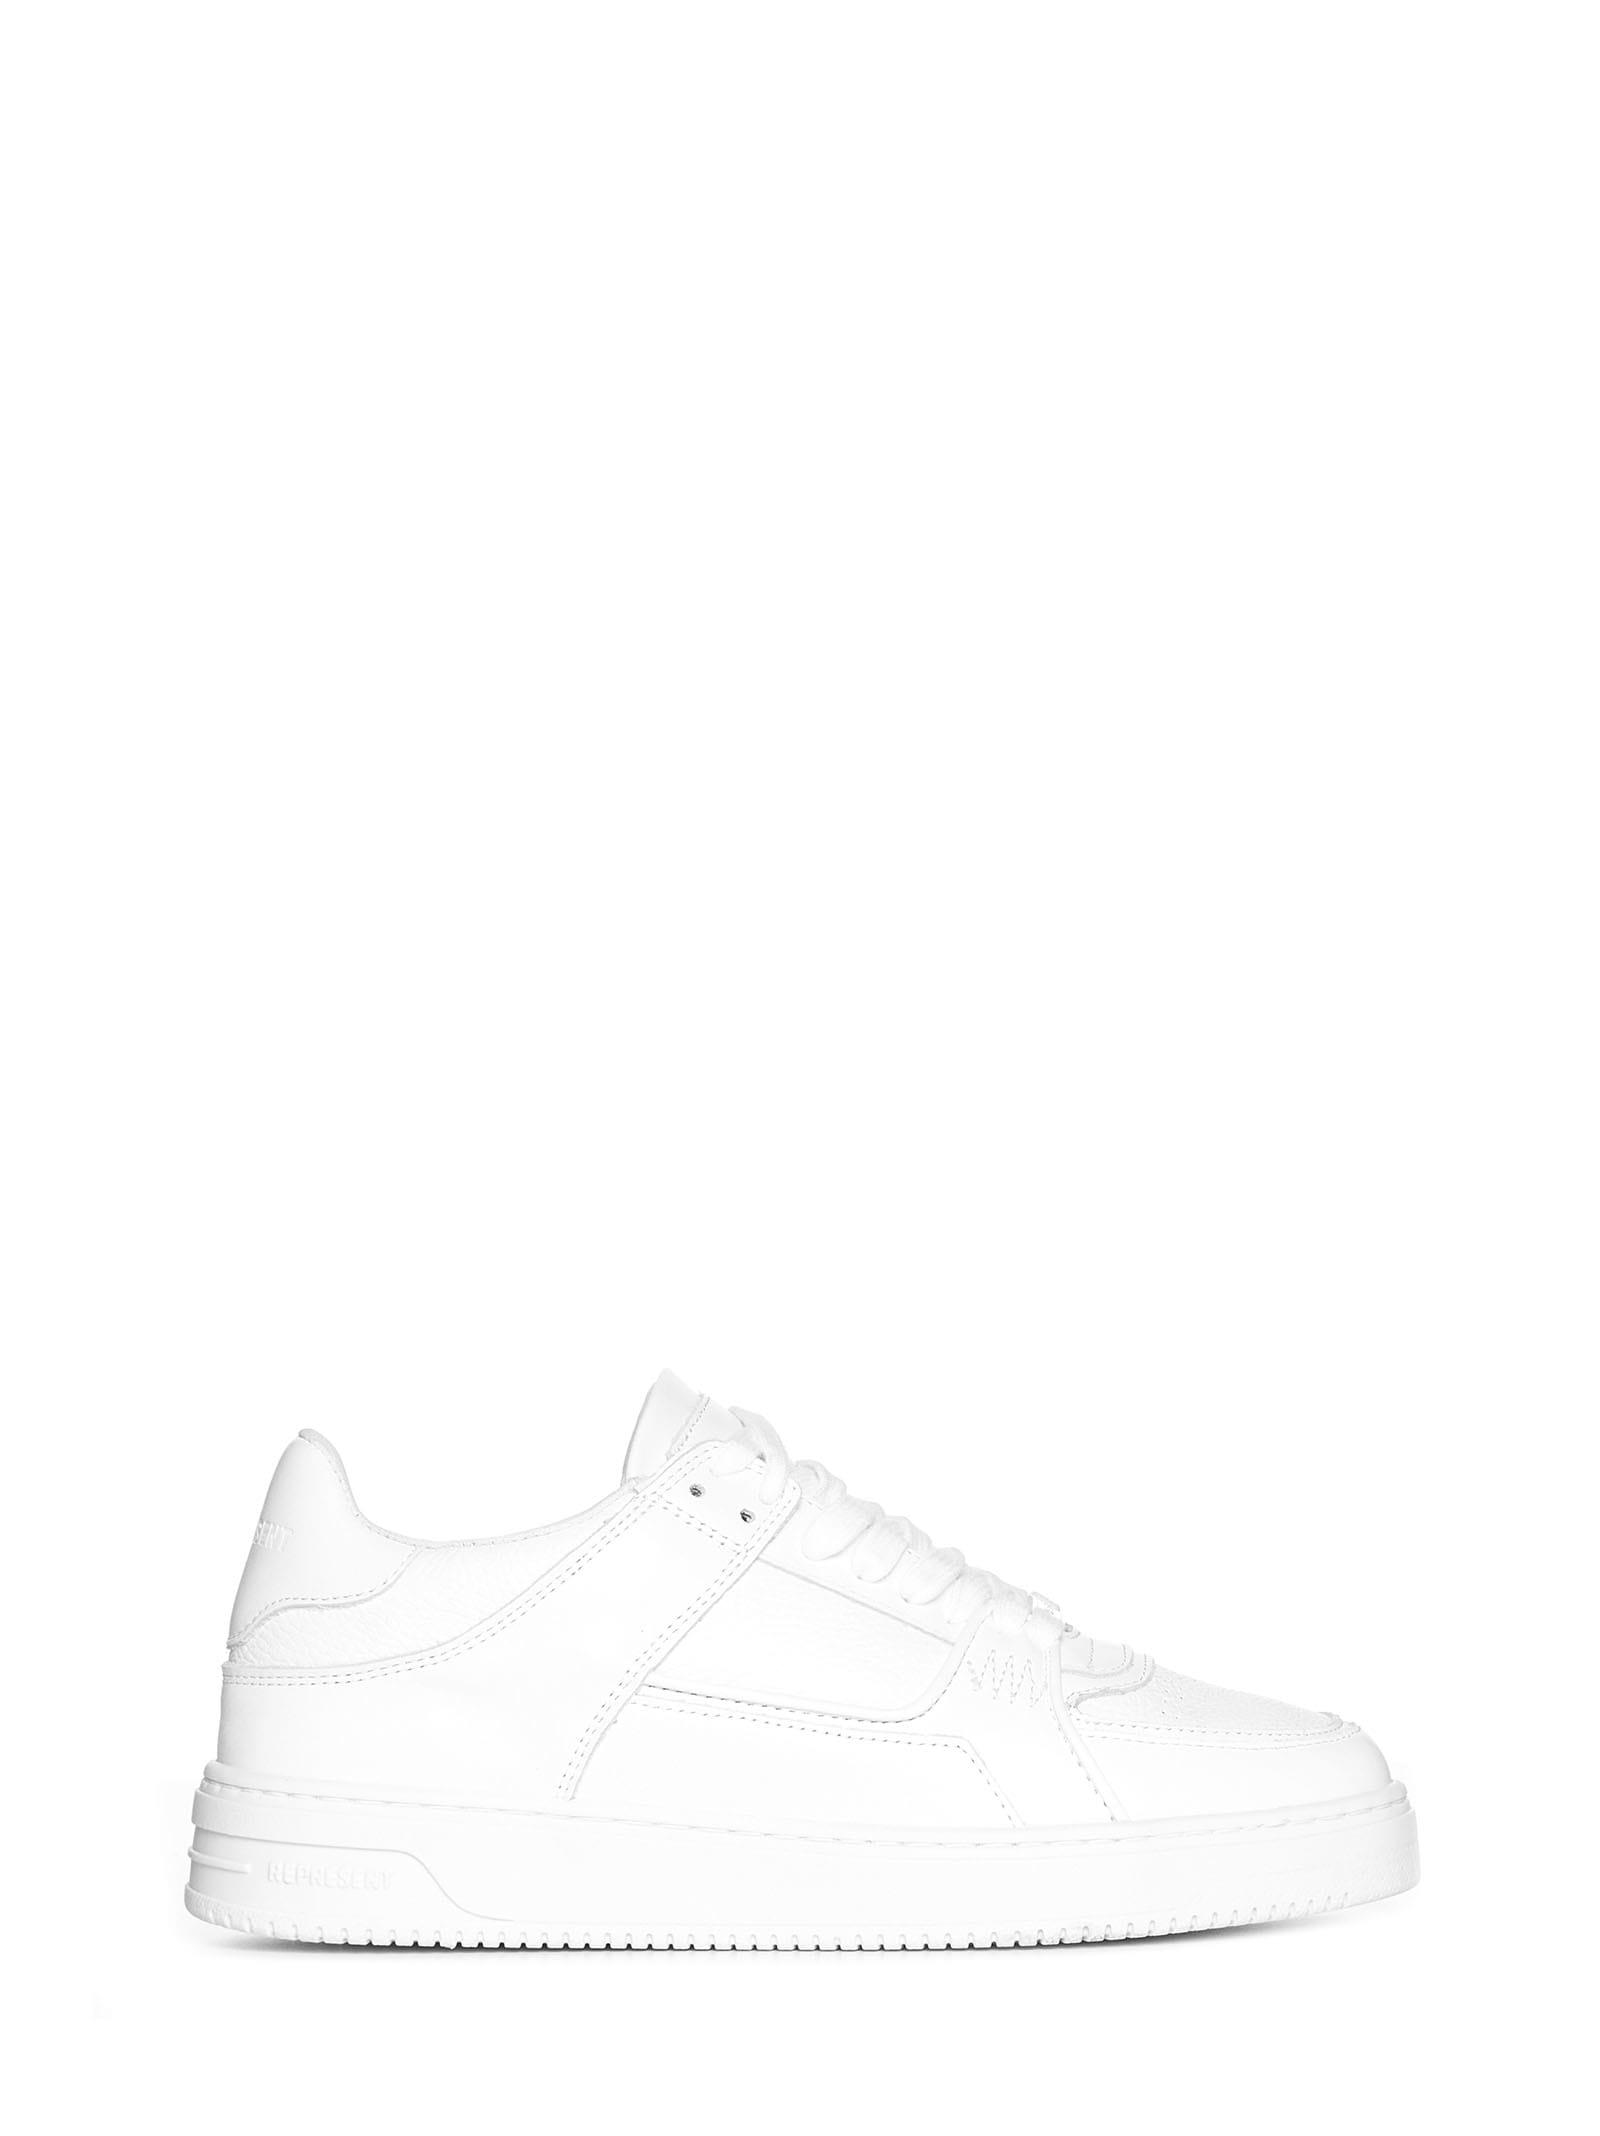 Represent Apex Leather Sneakers in White for Men | Lyst